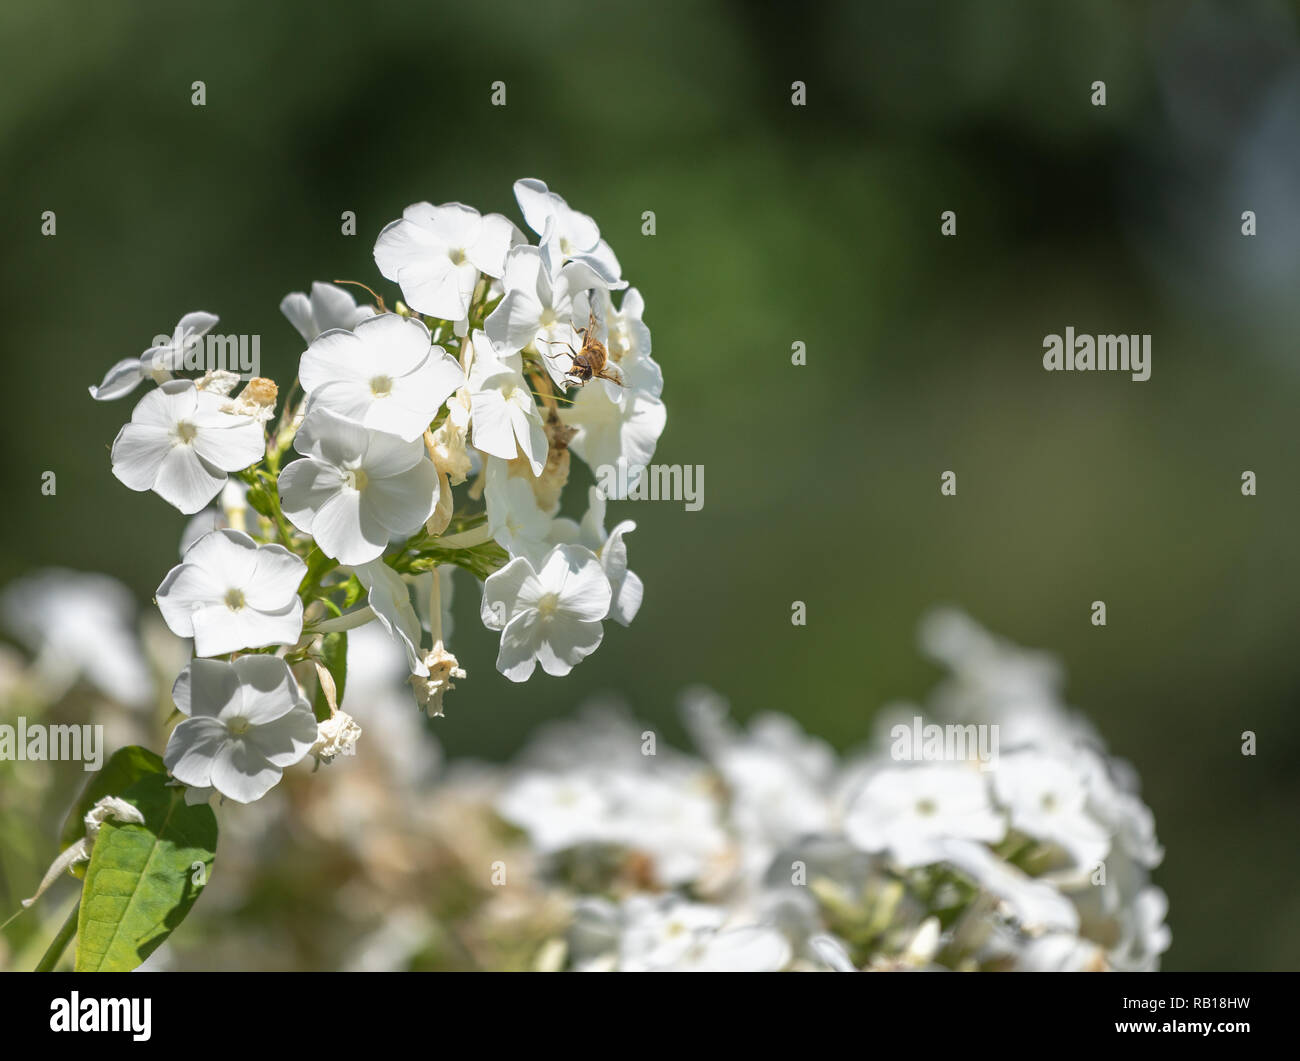 Color outdoor nature image of a bee sitting on a bunch / cluster of white phlox blossoms on natural green blurred background on a bright sunny summer Stock Photo